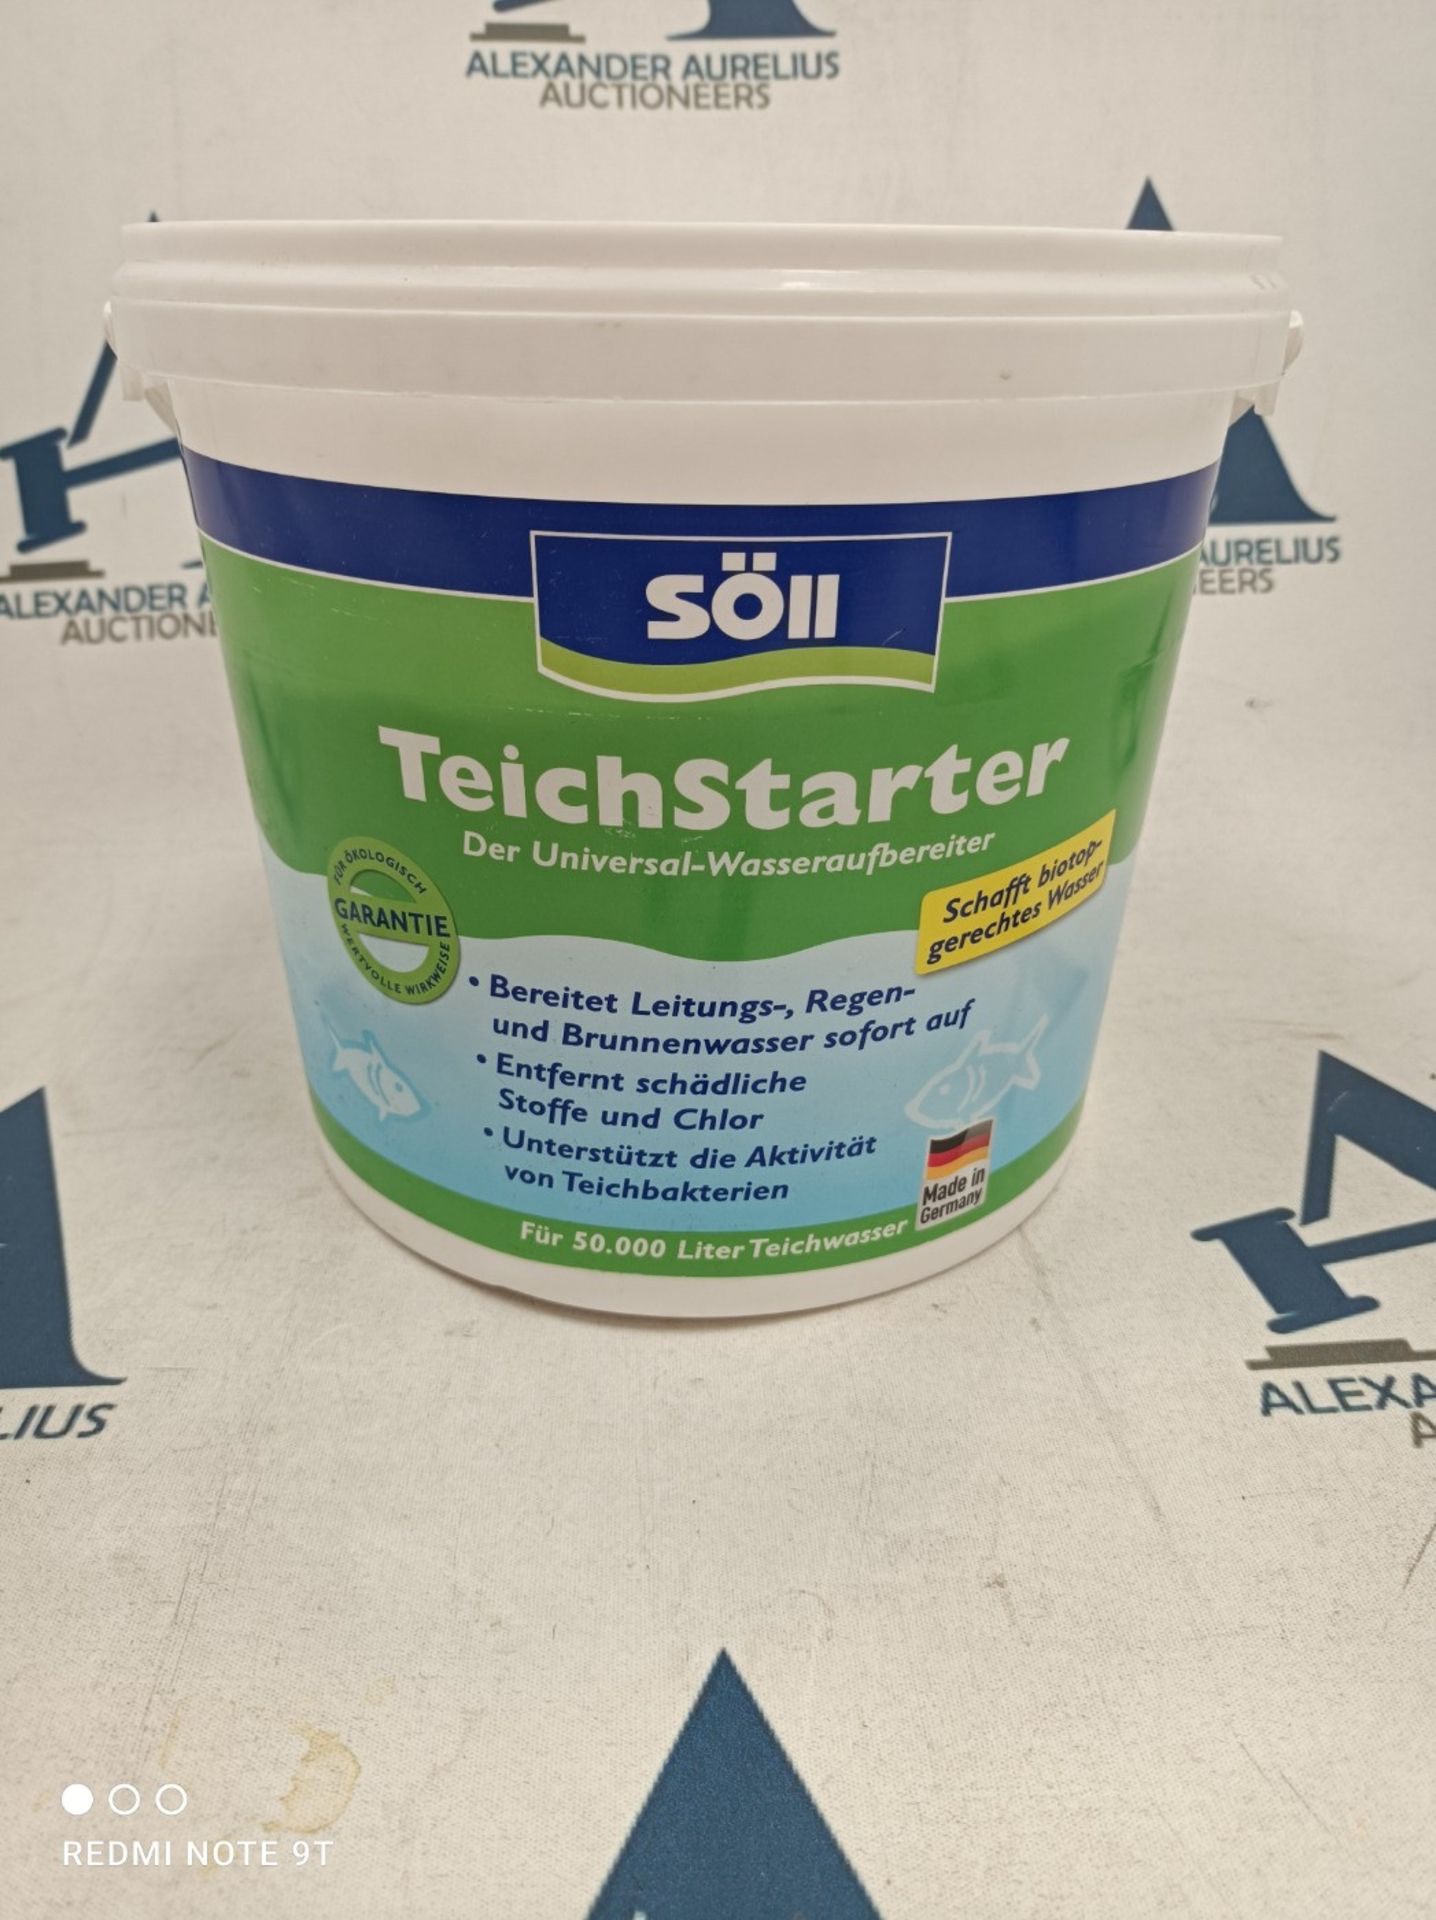 RRP £96.00 Universal water conditioner TeichStarter from Söll (5 kg for 50,000 liters) immediate